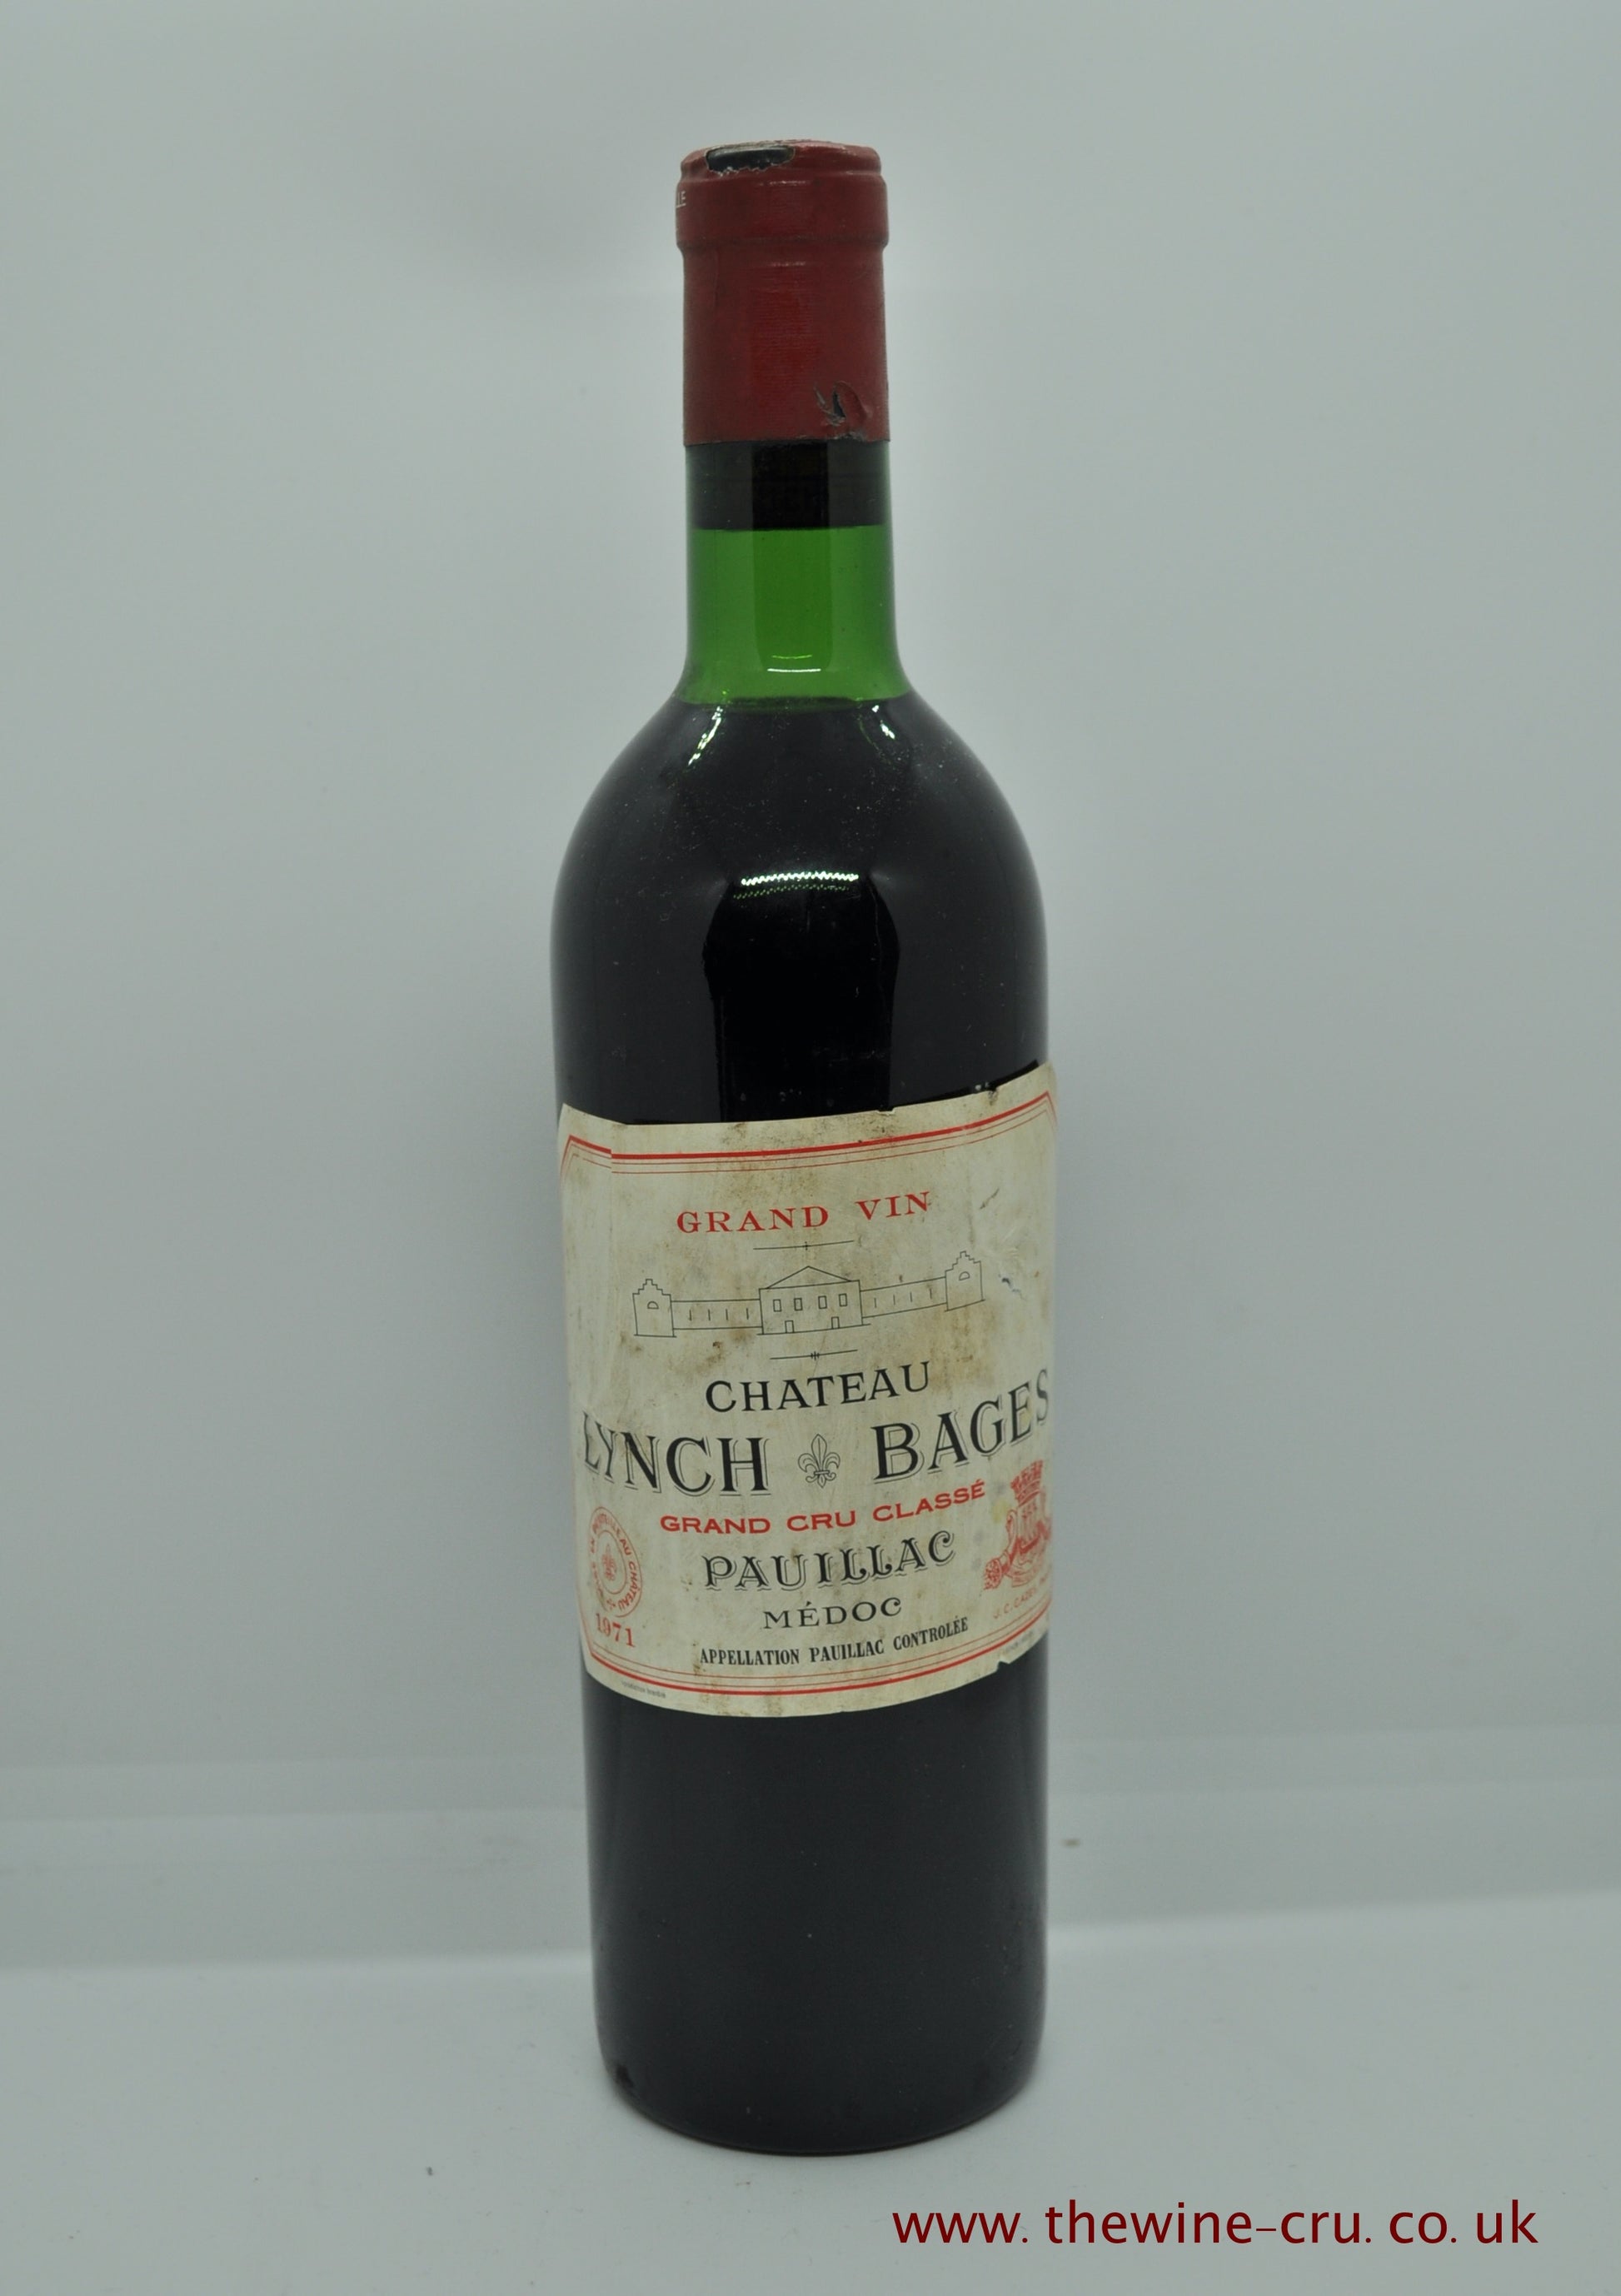 1971 vintage red wine. Chateau Lynch Bages 1971. France, Bordeaux. Immediate delivery. Free local delivery. Gift wrapping available.